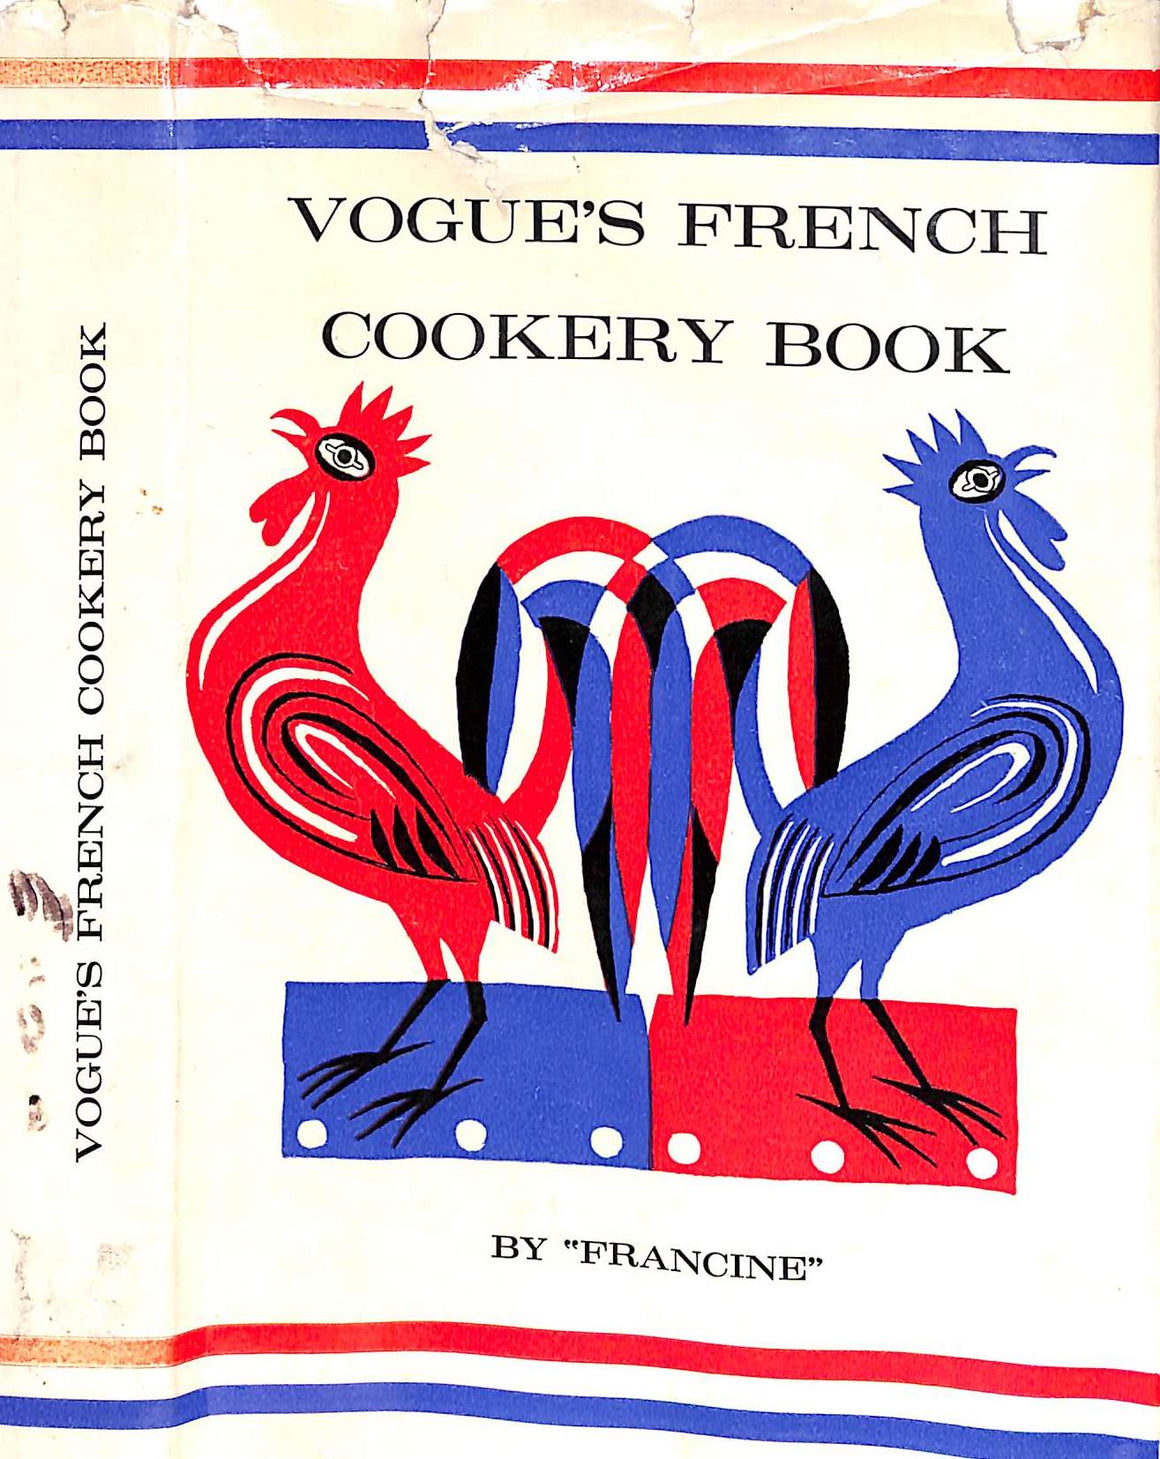 "Vogue's French Cookery Book" 1961 "Francine" and HASKETT-SMITH, Chris [translated by]